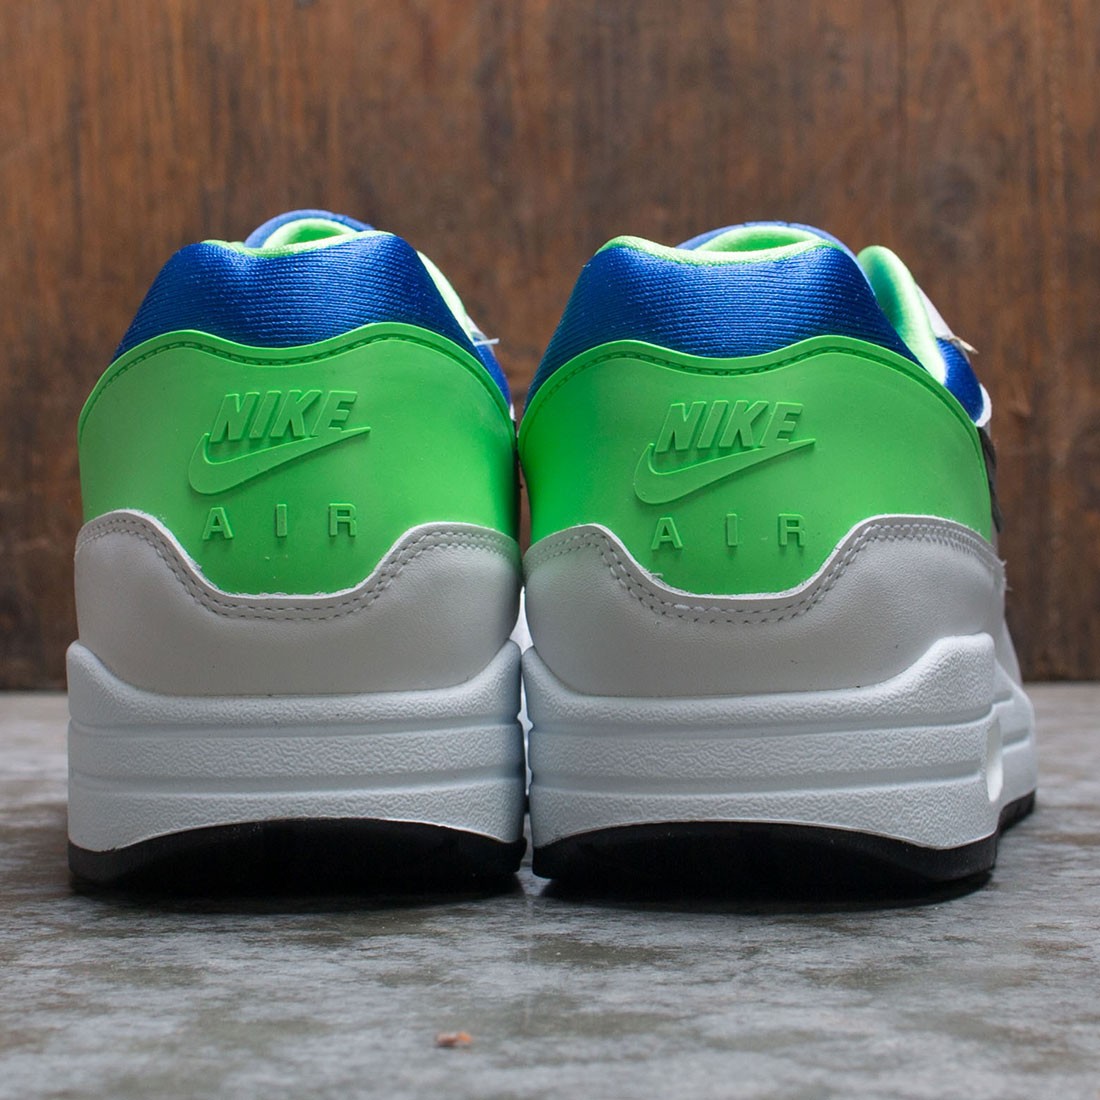 white blue and green air max